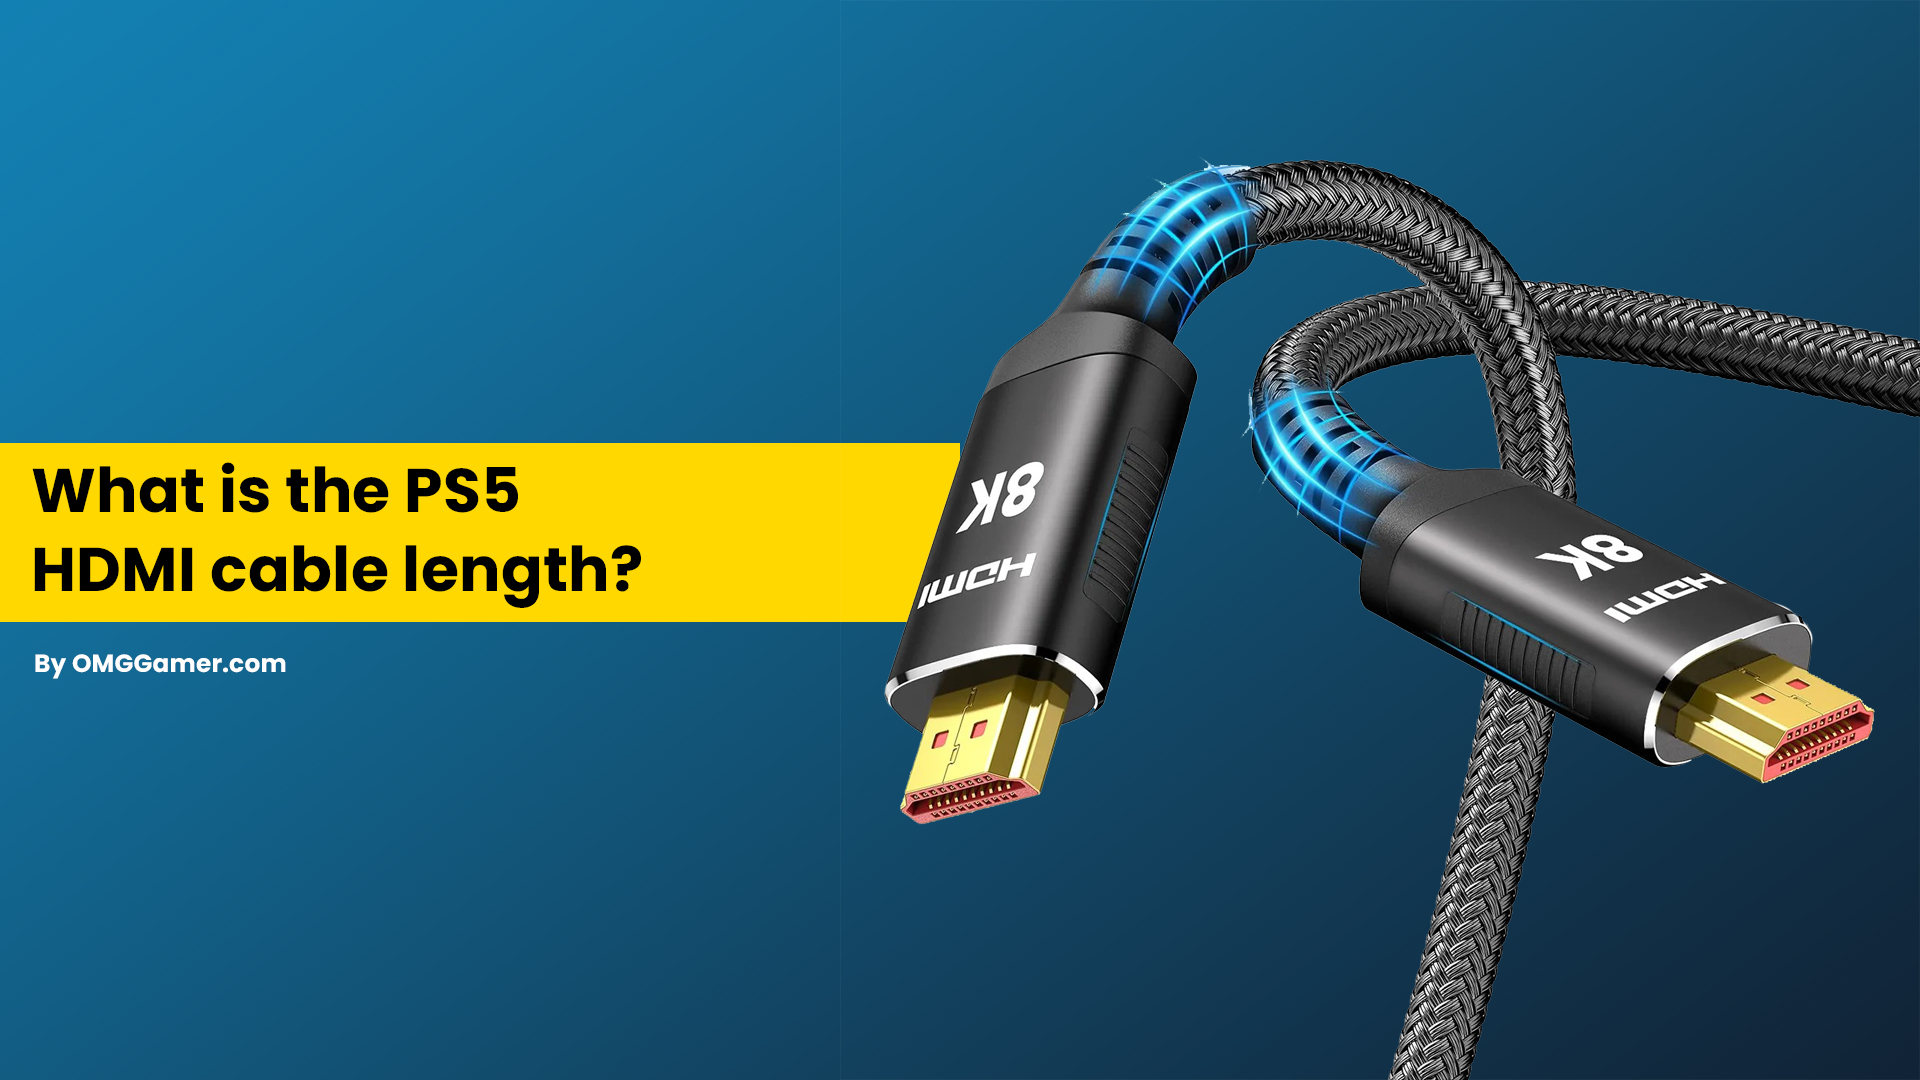 What is the PS5 HDMI cable length